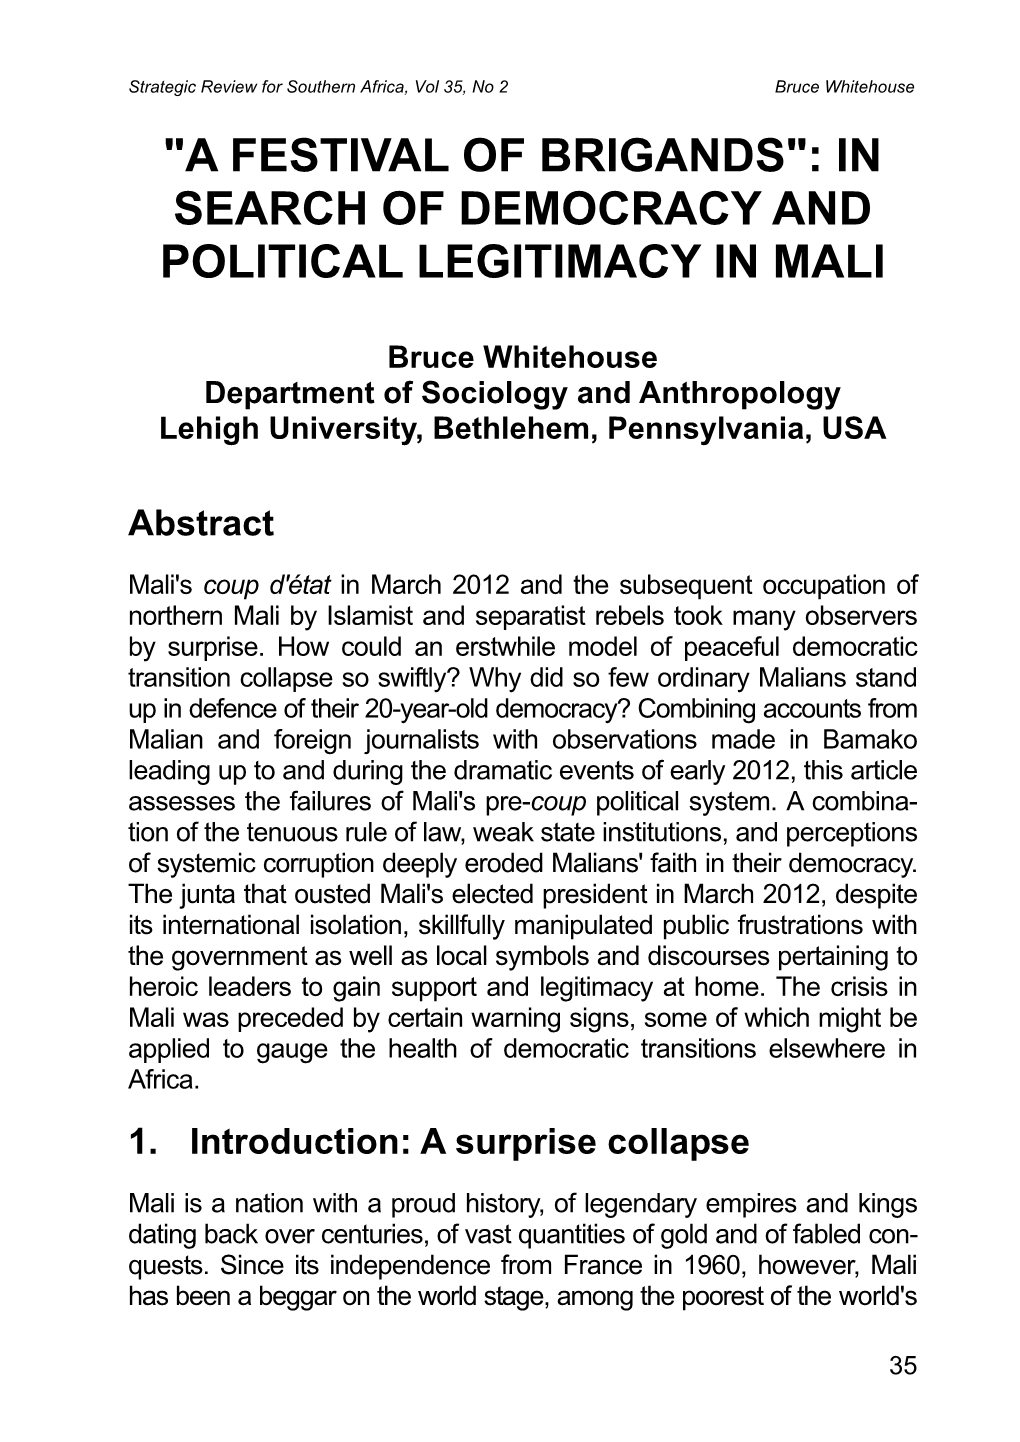 In Search of Democracy and Political Legitimacy in Mali